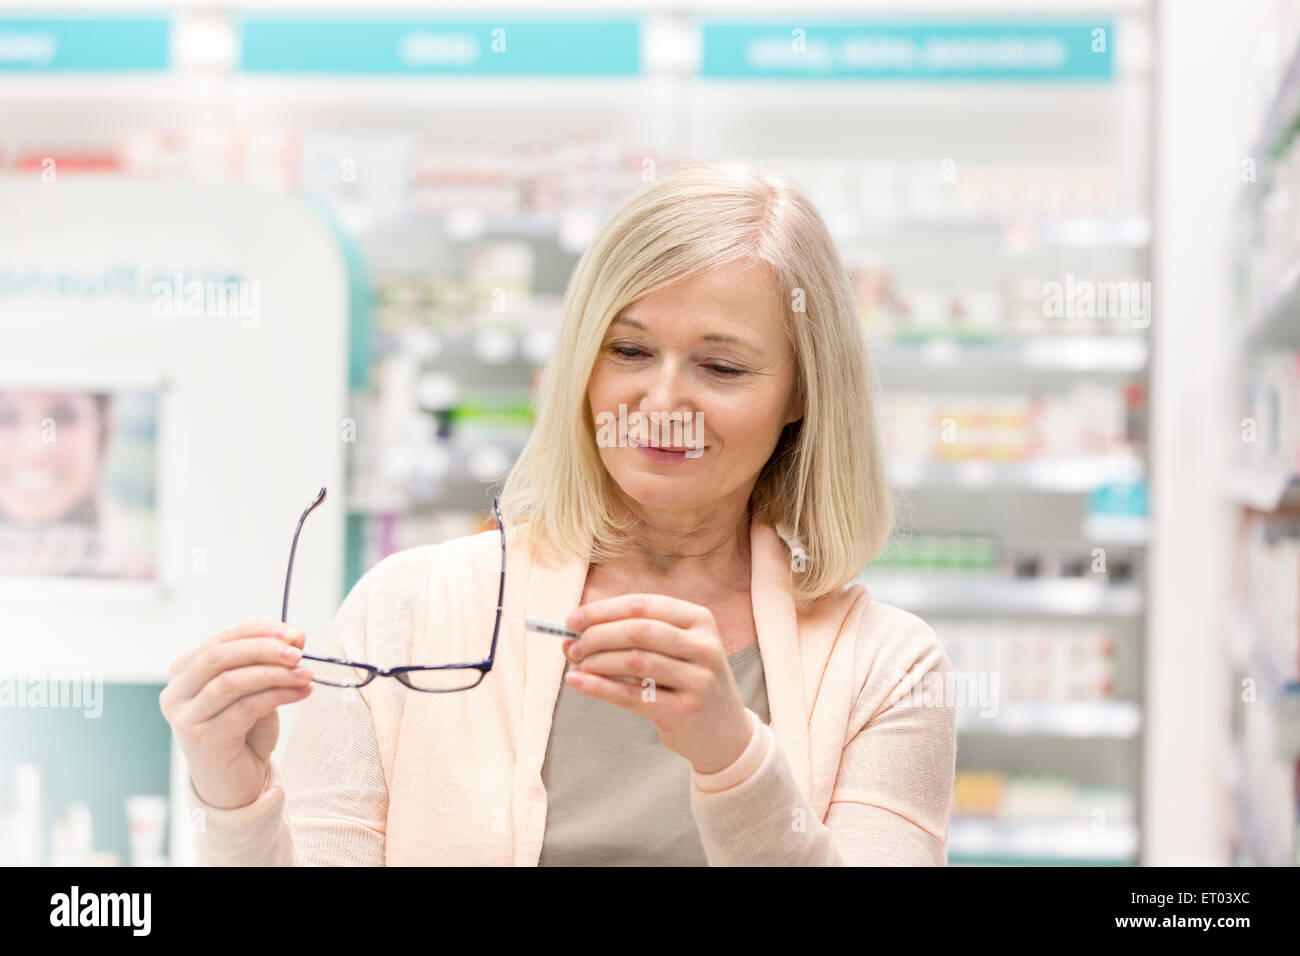 Customer looking at price tag on reading glasses in pharmacy Stock Photo